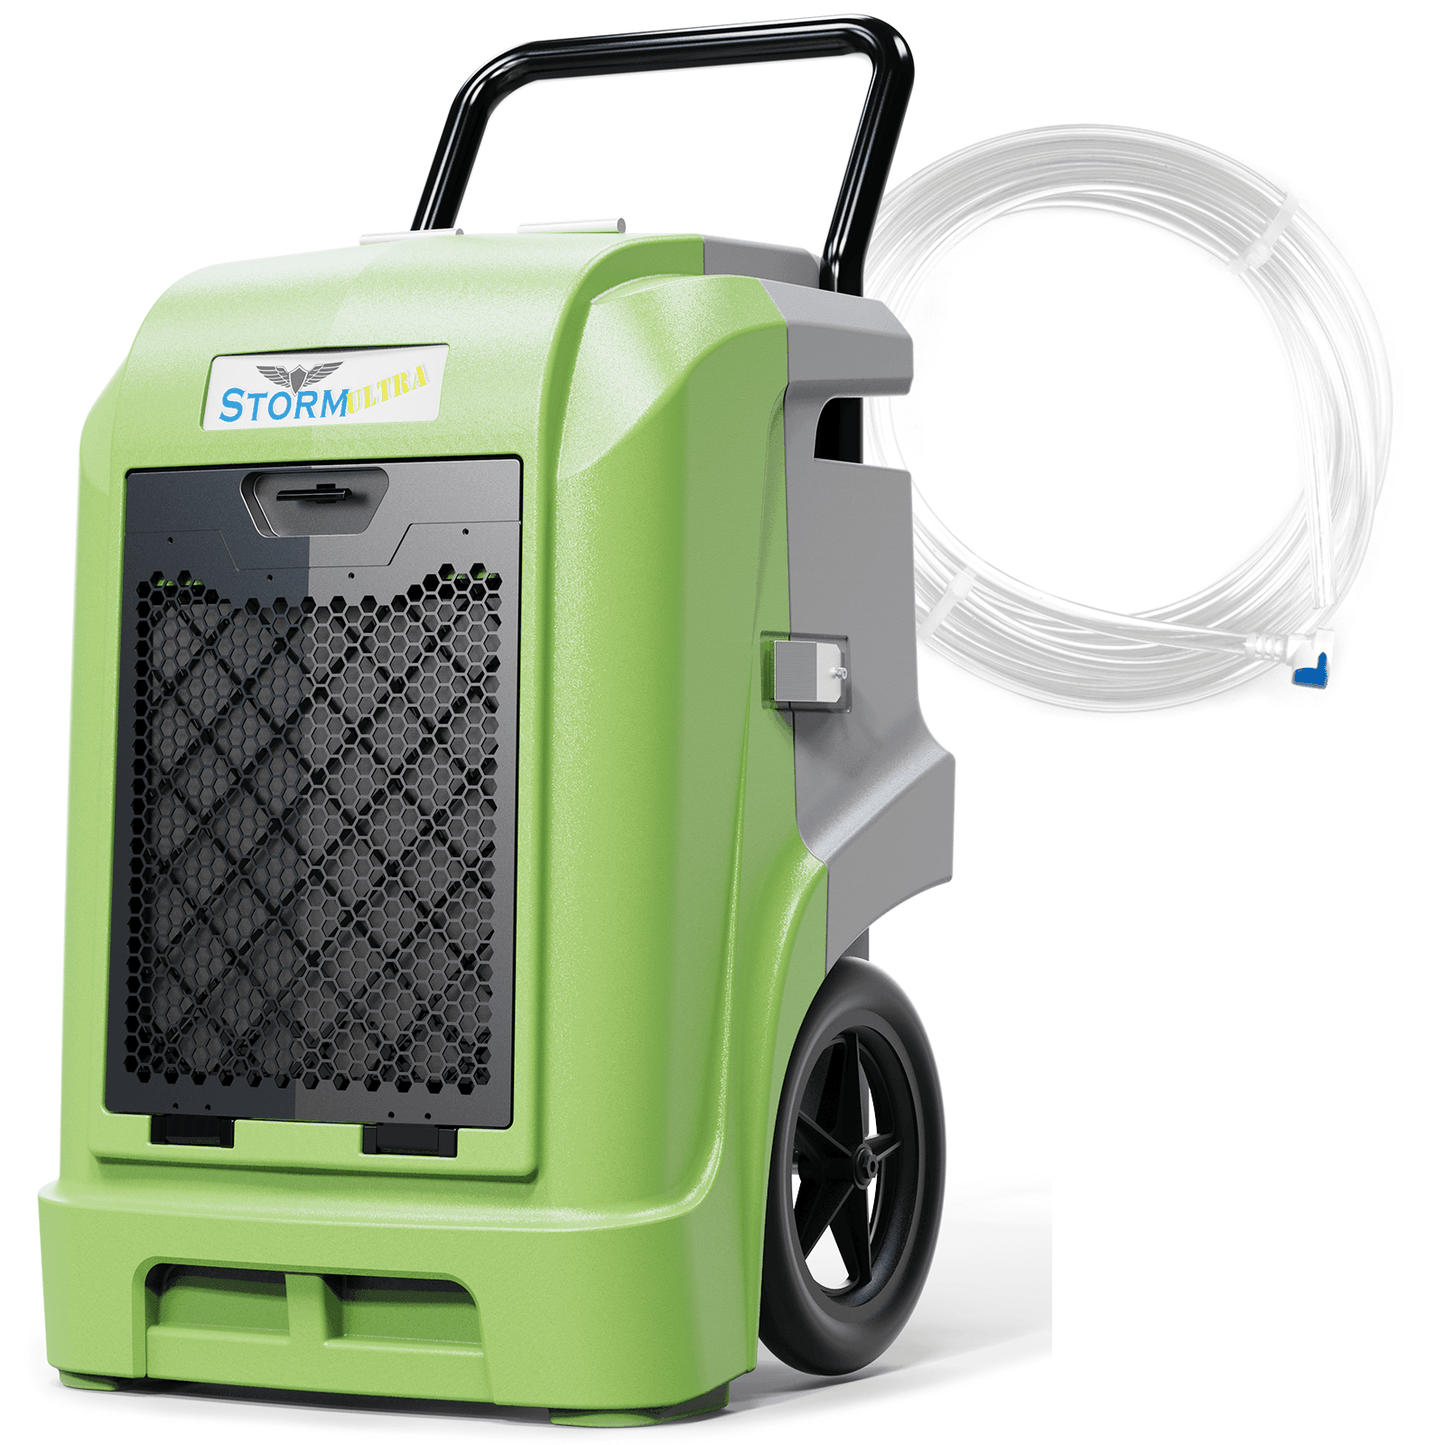 AlorAir Storm Ultra LGR Smart Wi-Fi 190 PPD 2,600 sq. ft. Large Commercial Dehumidifier